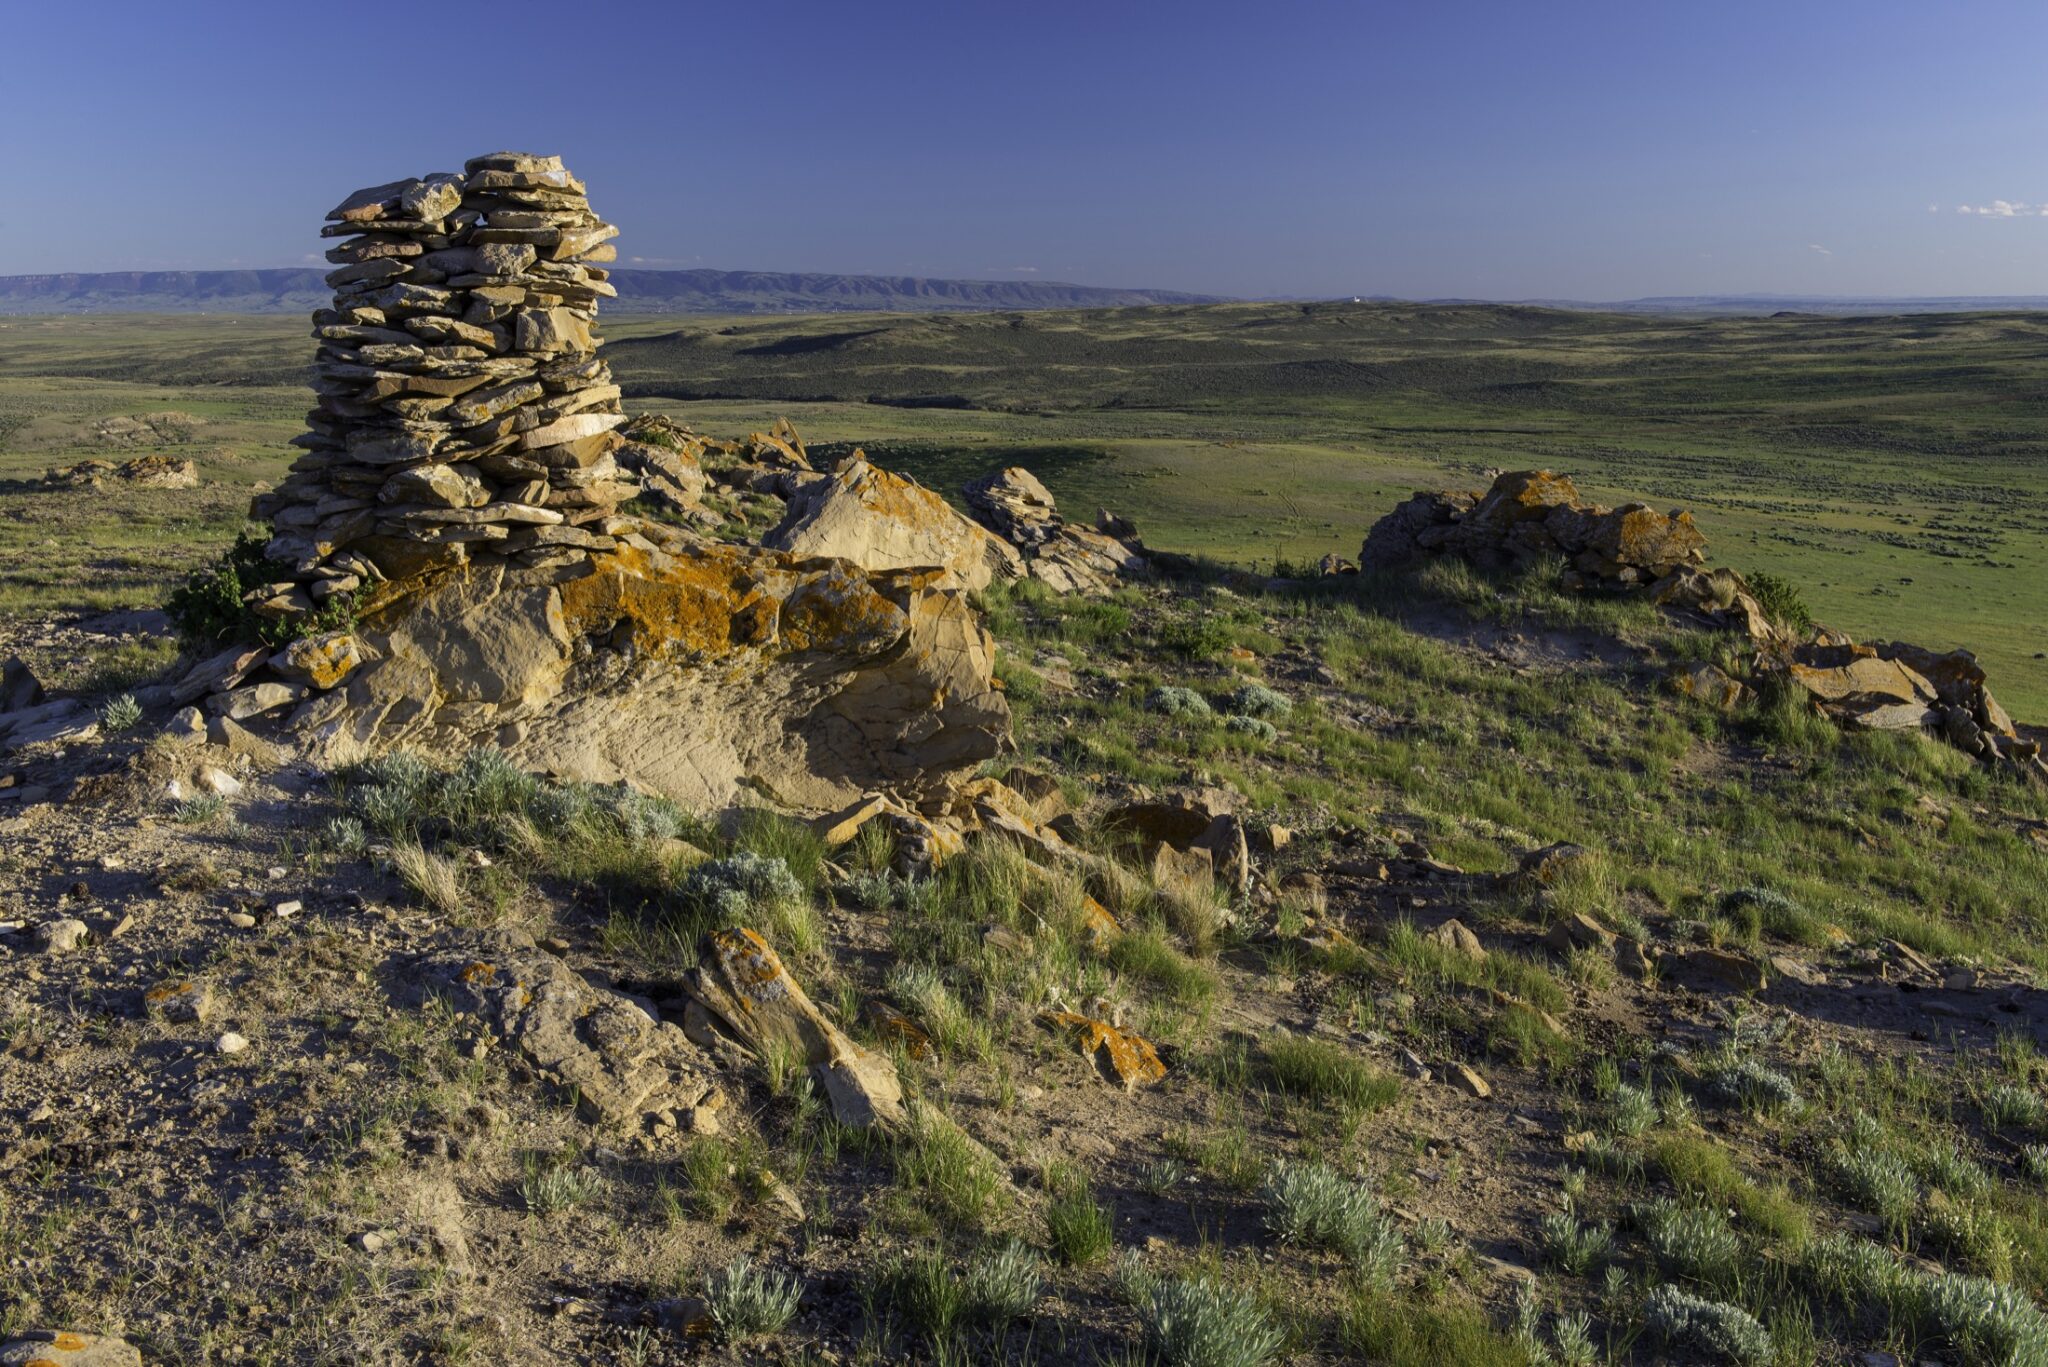 A neat stack of sandstone rocks on a hilltop